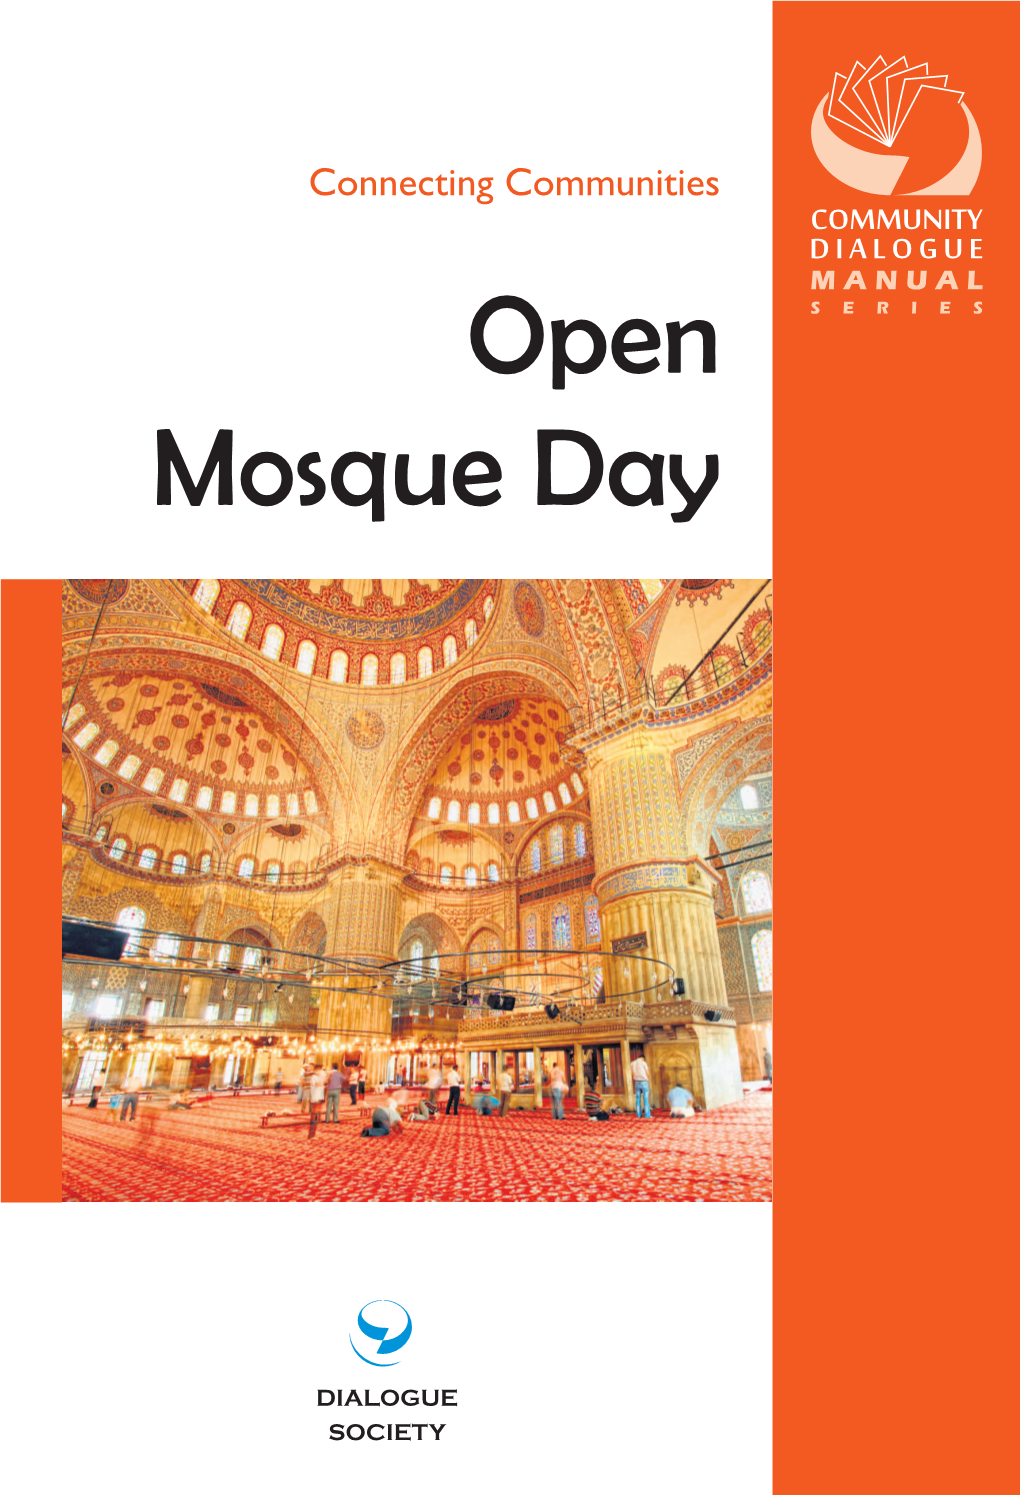 Open Mosque Day to Readers of This Manual